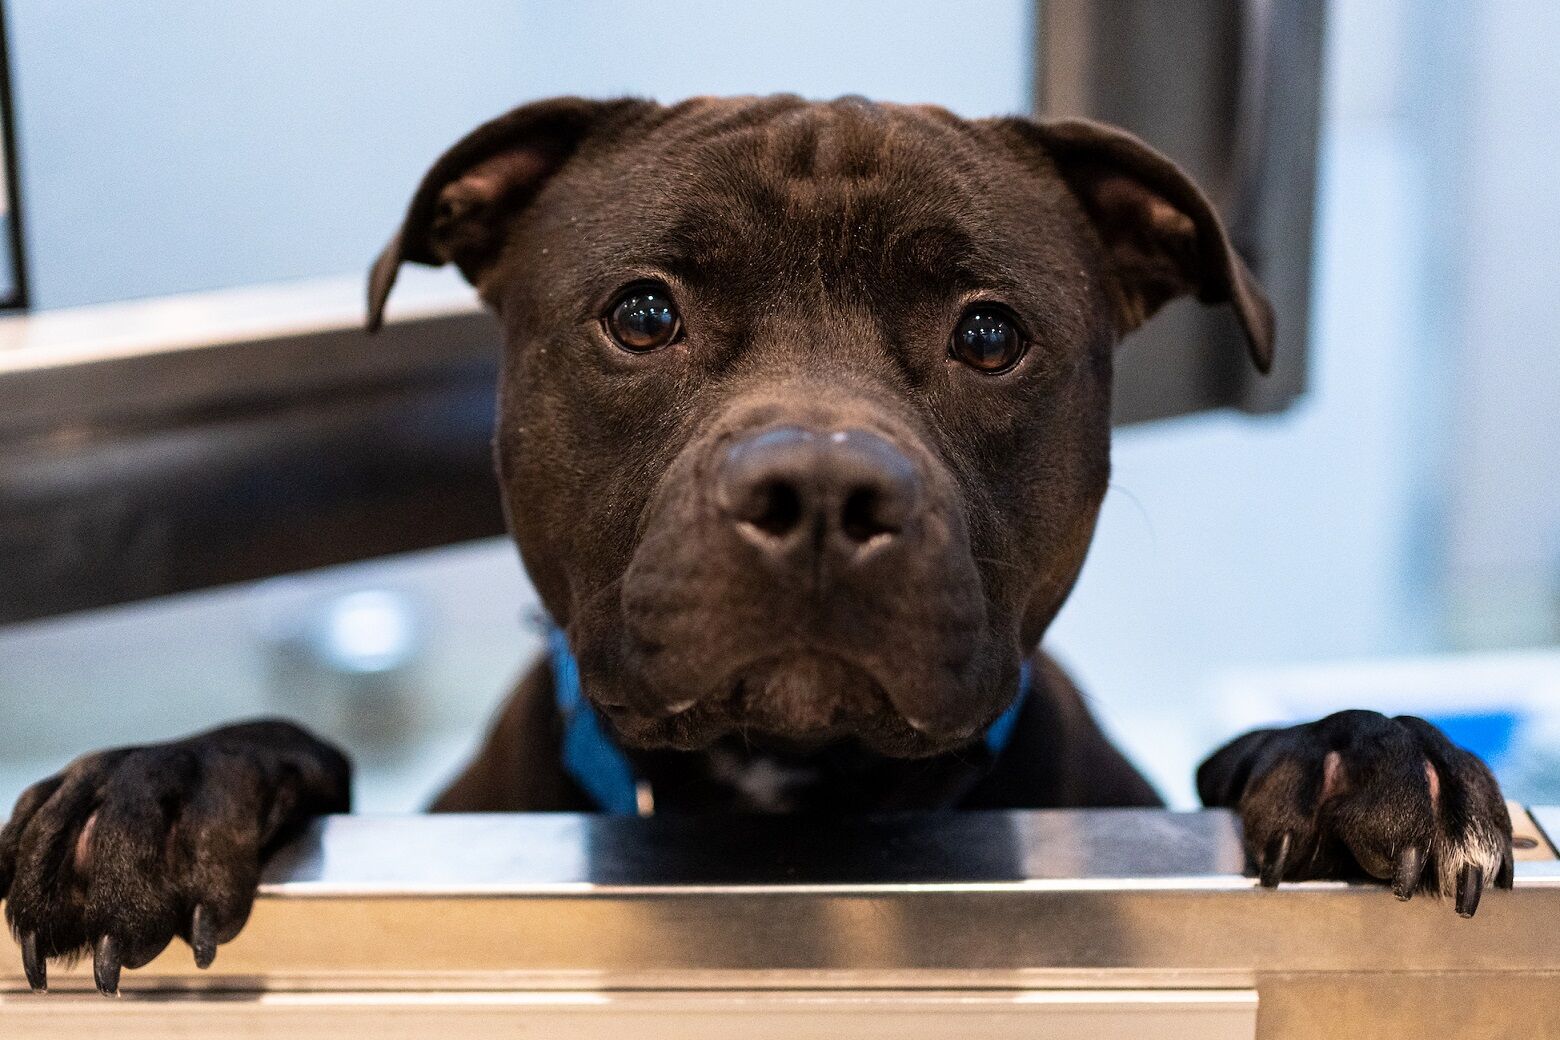 <p>Meet Kilo — this sweet pup is truly 1 in a 1,000!</p>
<p>Kilo is a handsome 5-year-old boy with the most soulful eyes. This good boy enjoys car rides and going for fun, long walks with his favorite staff and volunteers. Did we mentioned he walks quite nicely on leash!</p>
<p>There isn&#8217;t much Kilo enjoys more than attention and getting all the pets and love he can. He&#8217;s also an all-star at playing tag, and you can&#8217;t not laugh when you watch Kilo get the zoomies at play time.</p>
<p>Kilo was found as a stray but he&#8217;s looking forward to a happy future with a family that will love him endlessly.</p>
<p>Learn more at <a href="http://humanerescuealliance.org/adopt" target="_blank" rel="noopener">humanerescuealliance.org/adopt</a>.</p>
